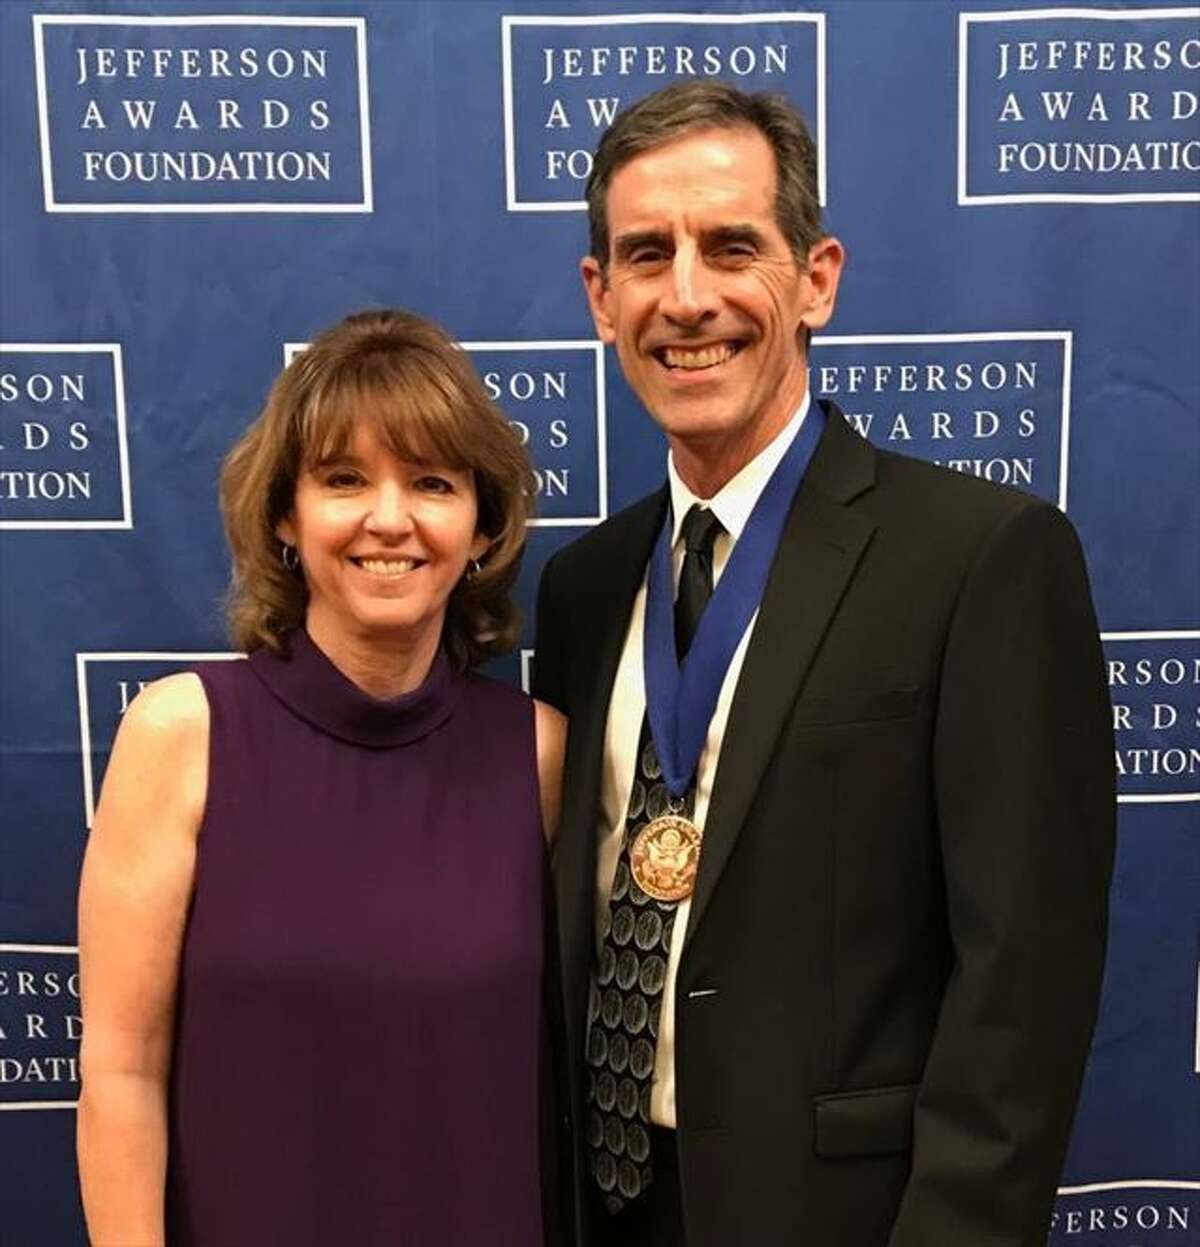 Deedee and Bill Hrncir pose for a photo at the Jefferson Awards in Washington, D.C.